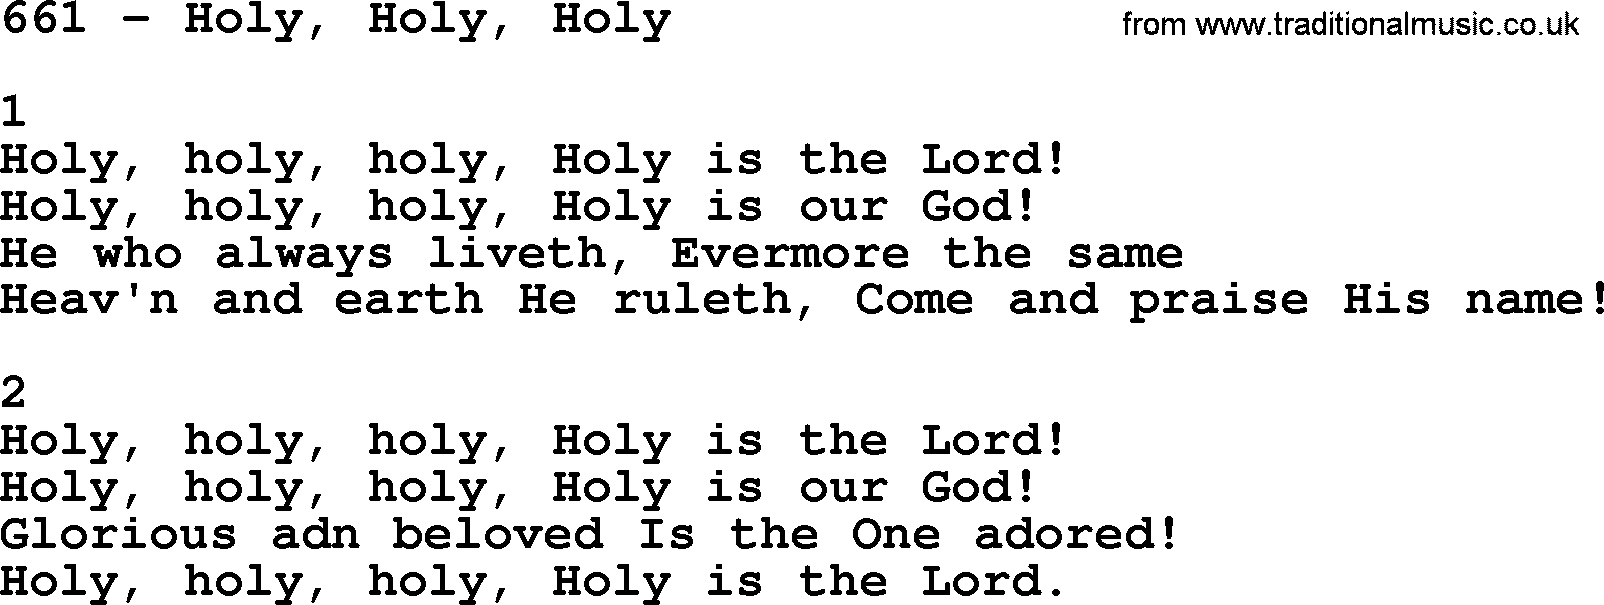 Complete Adventis Hymnal, title: 661-Holy, Holy, Holy, with lyrics, midi, mp3, powerpoints(PPT) and PDF,